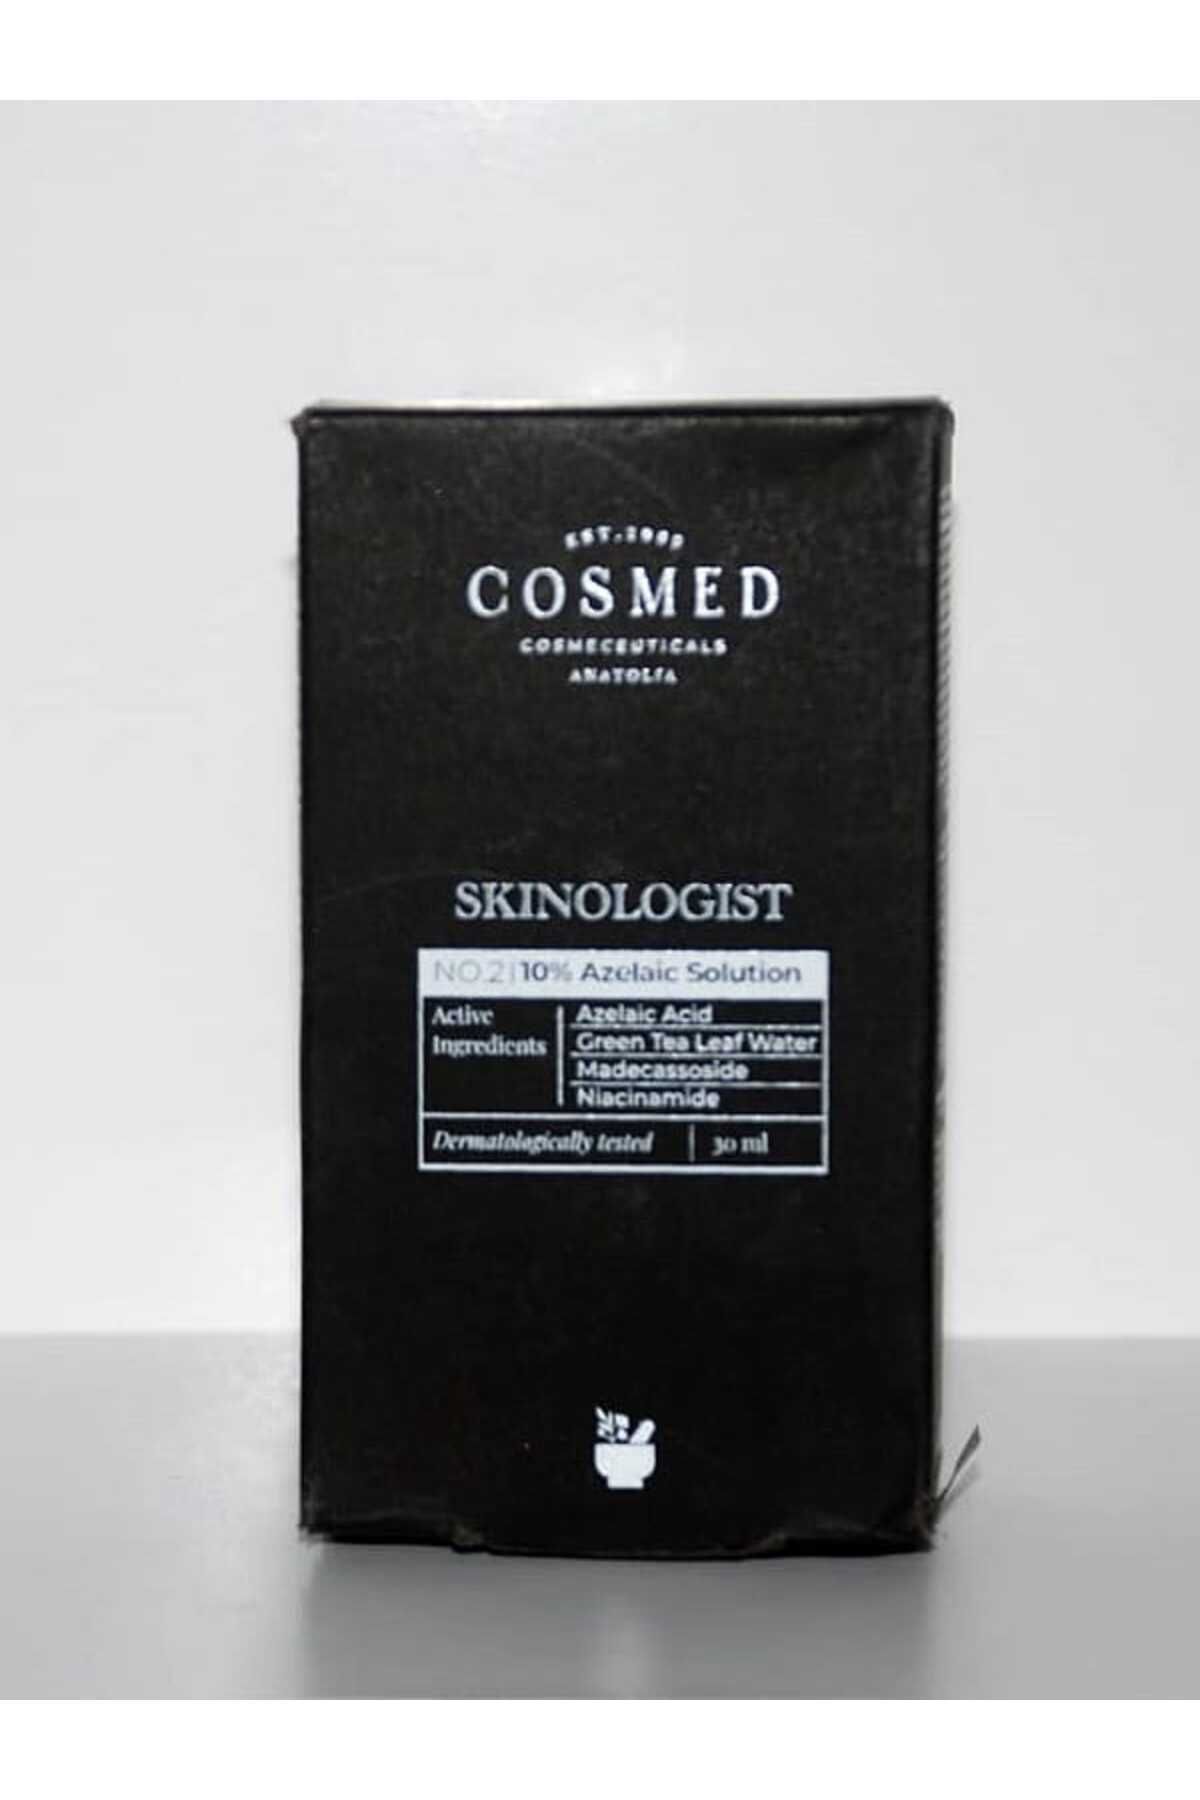 COSMED SKINOLOGIST 10%Azelaic Solution